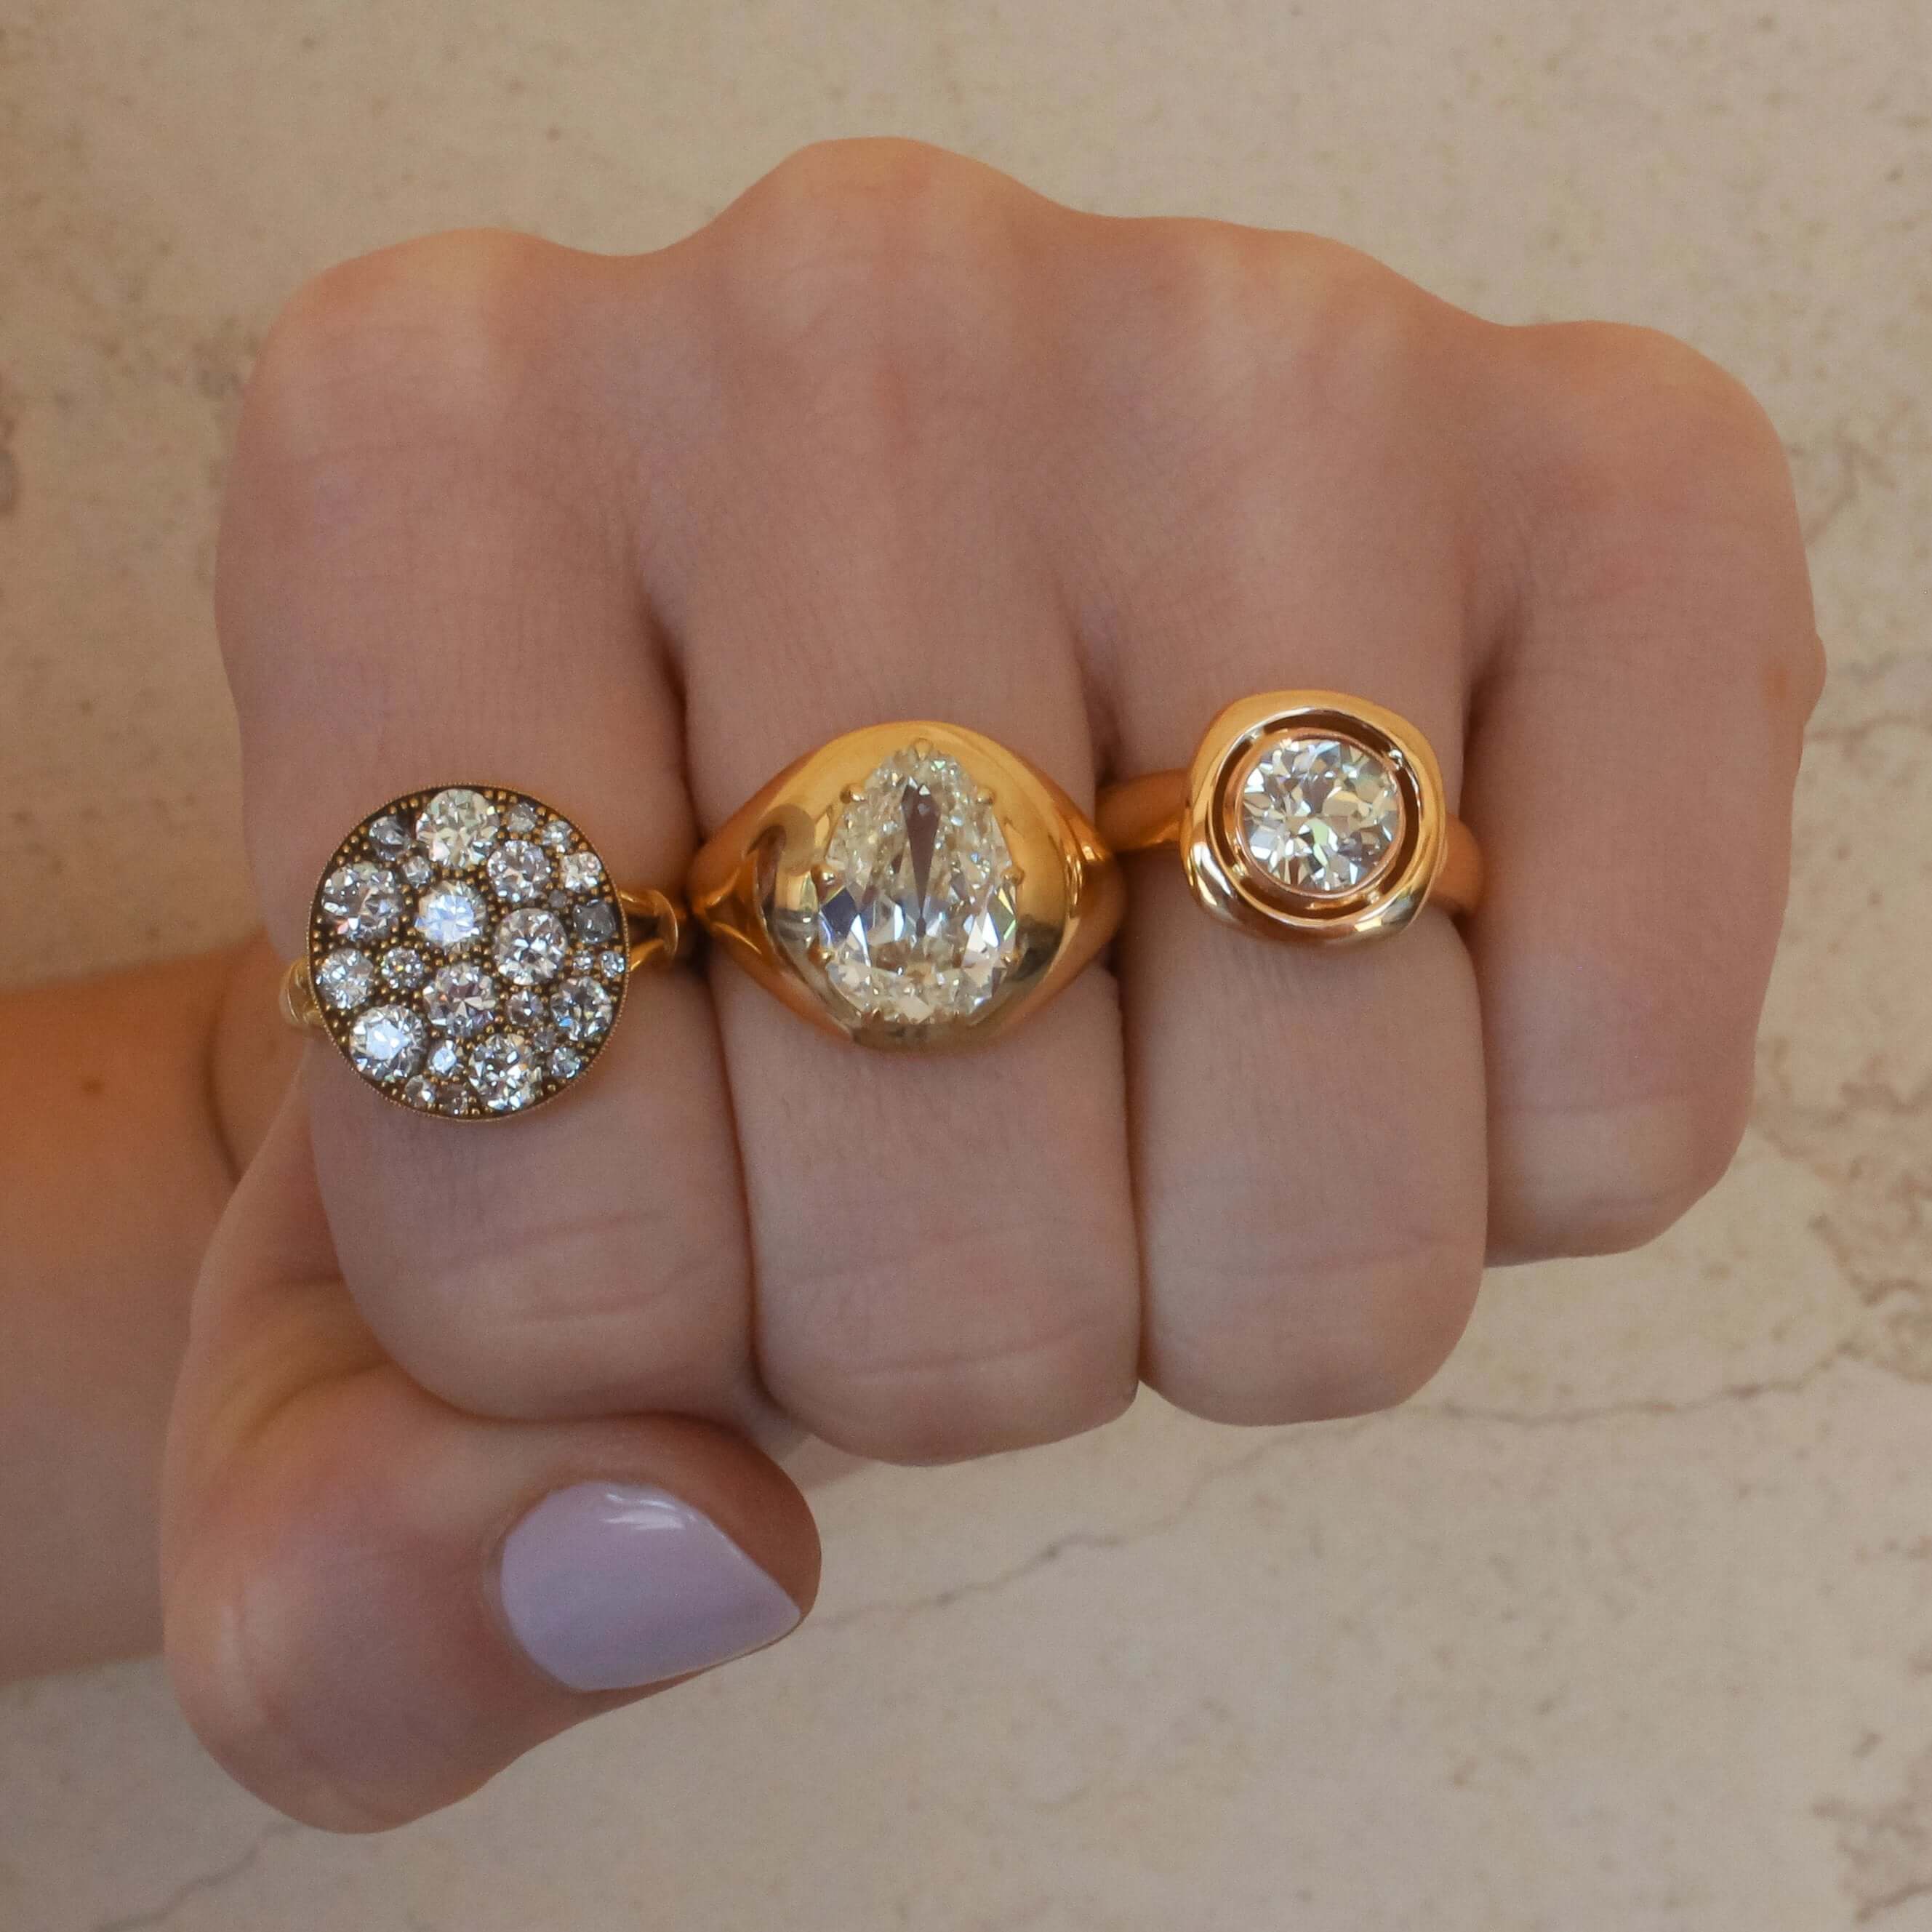 SINGLE STONE COBBLESTONE CRUX RING featuring 2.42ctw varying old cut and round brilliant cut diamonds set in a handcrafted, oxidized 18K yellow gold mounting. Price may vary according to total diamond weight. *Cobblestone pattern may vary from piece to pi